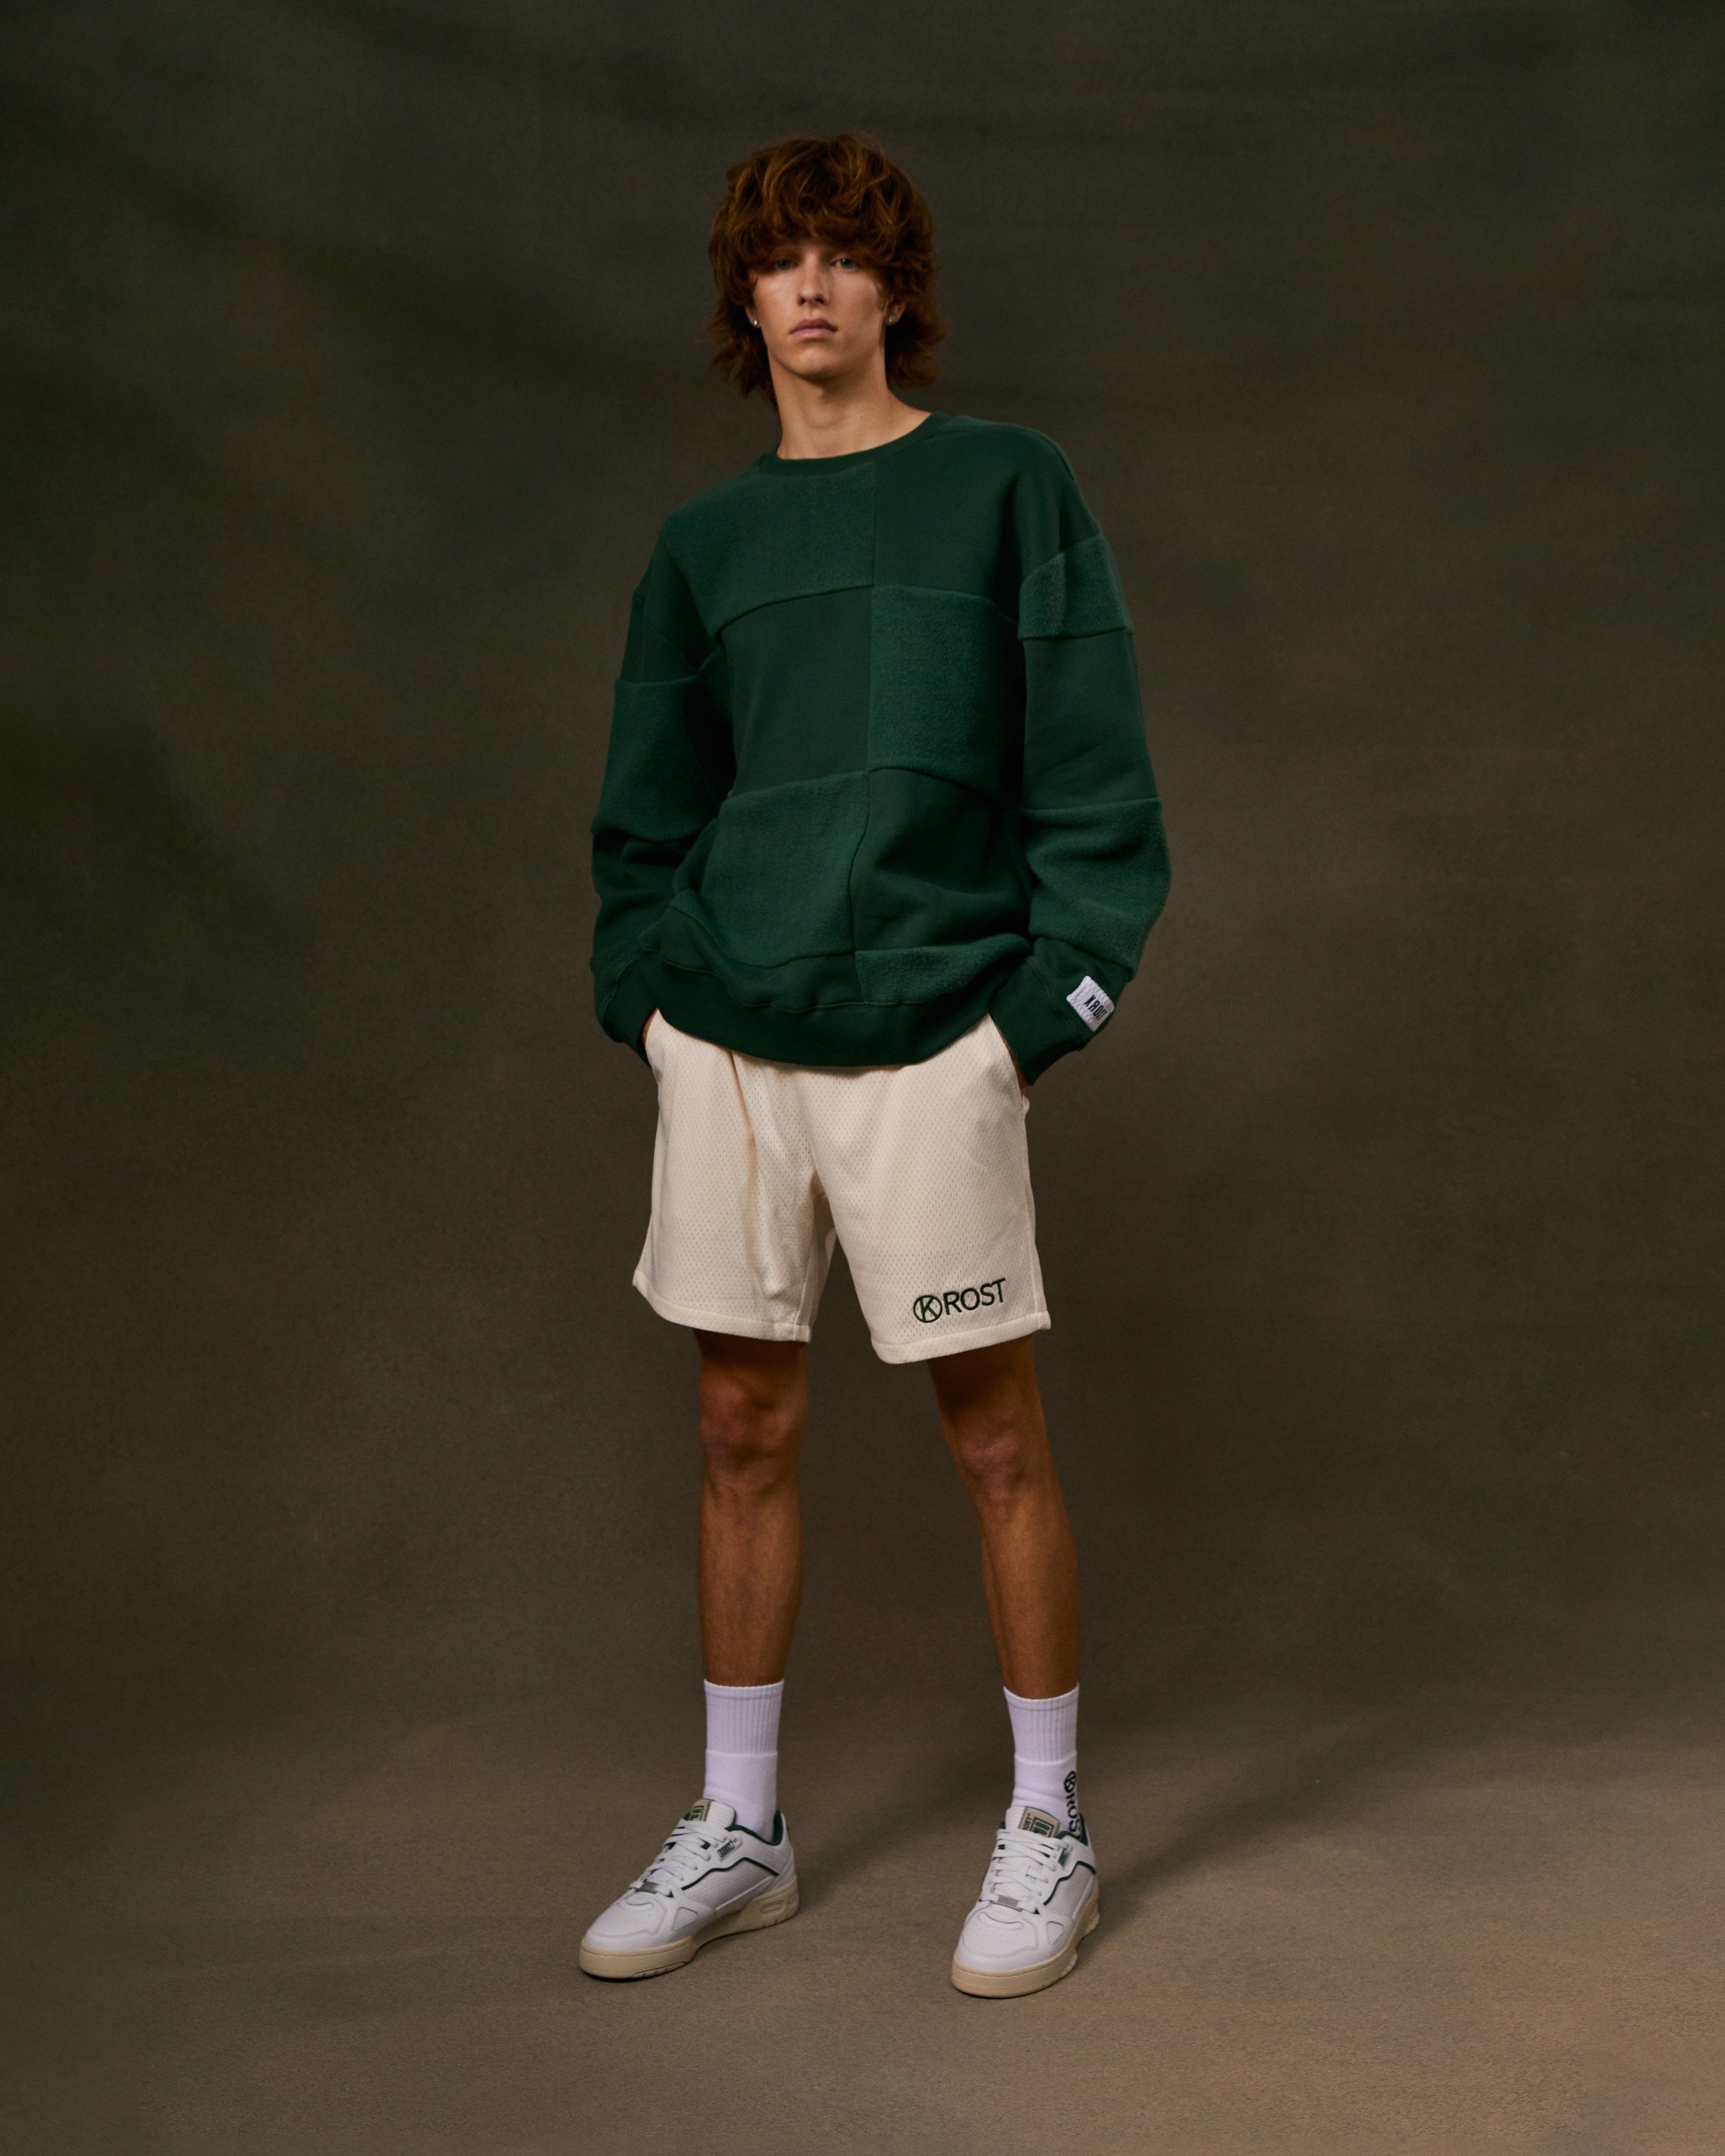 Fall/Winter 2022 Collection – KROST